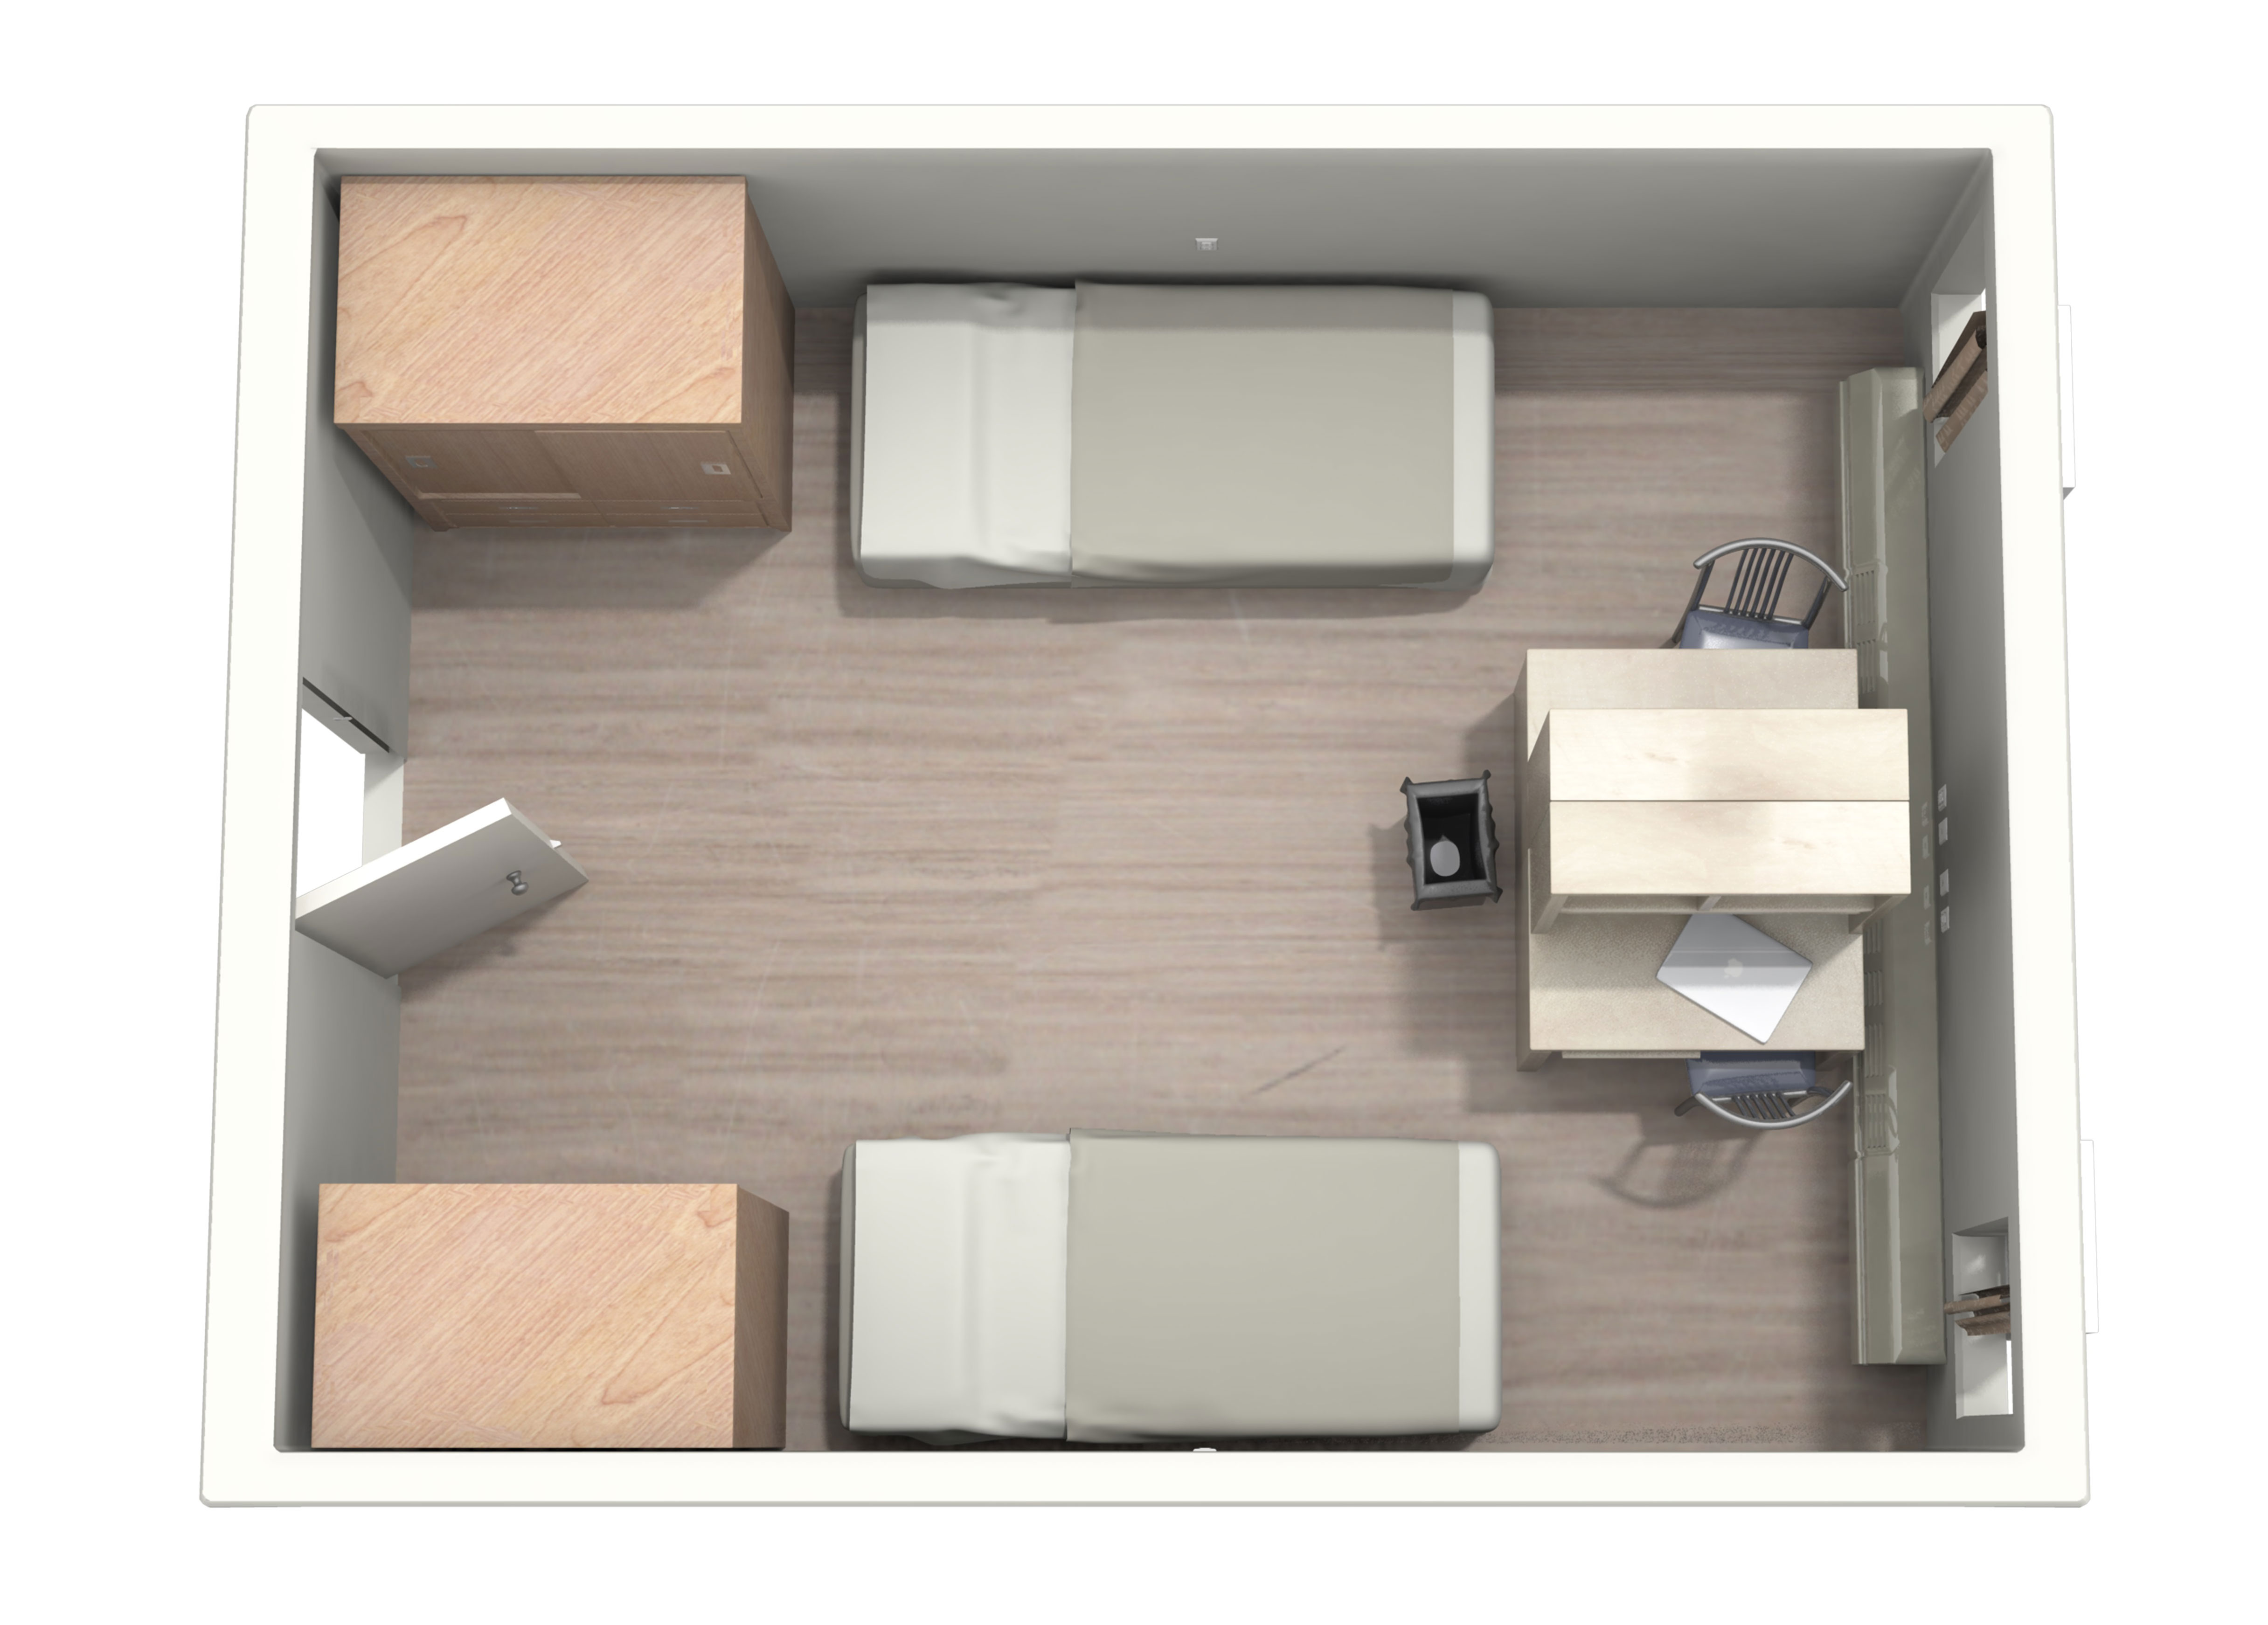 Floor plan with two single bed